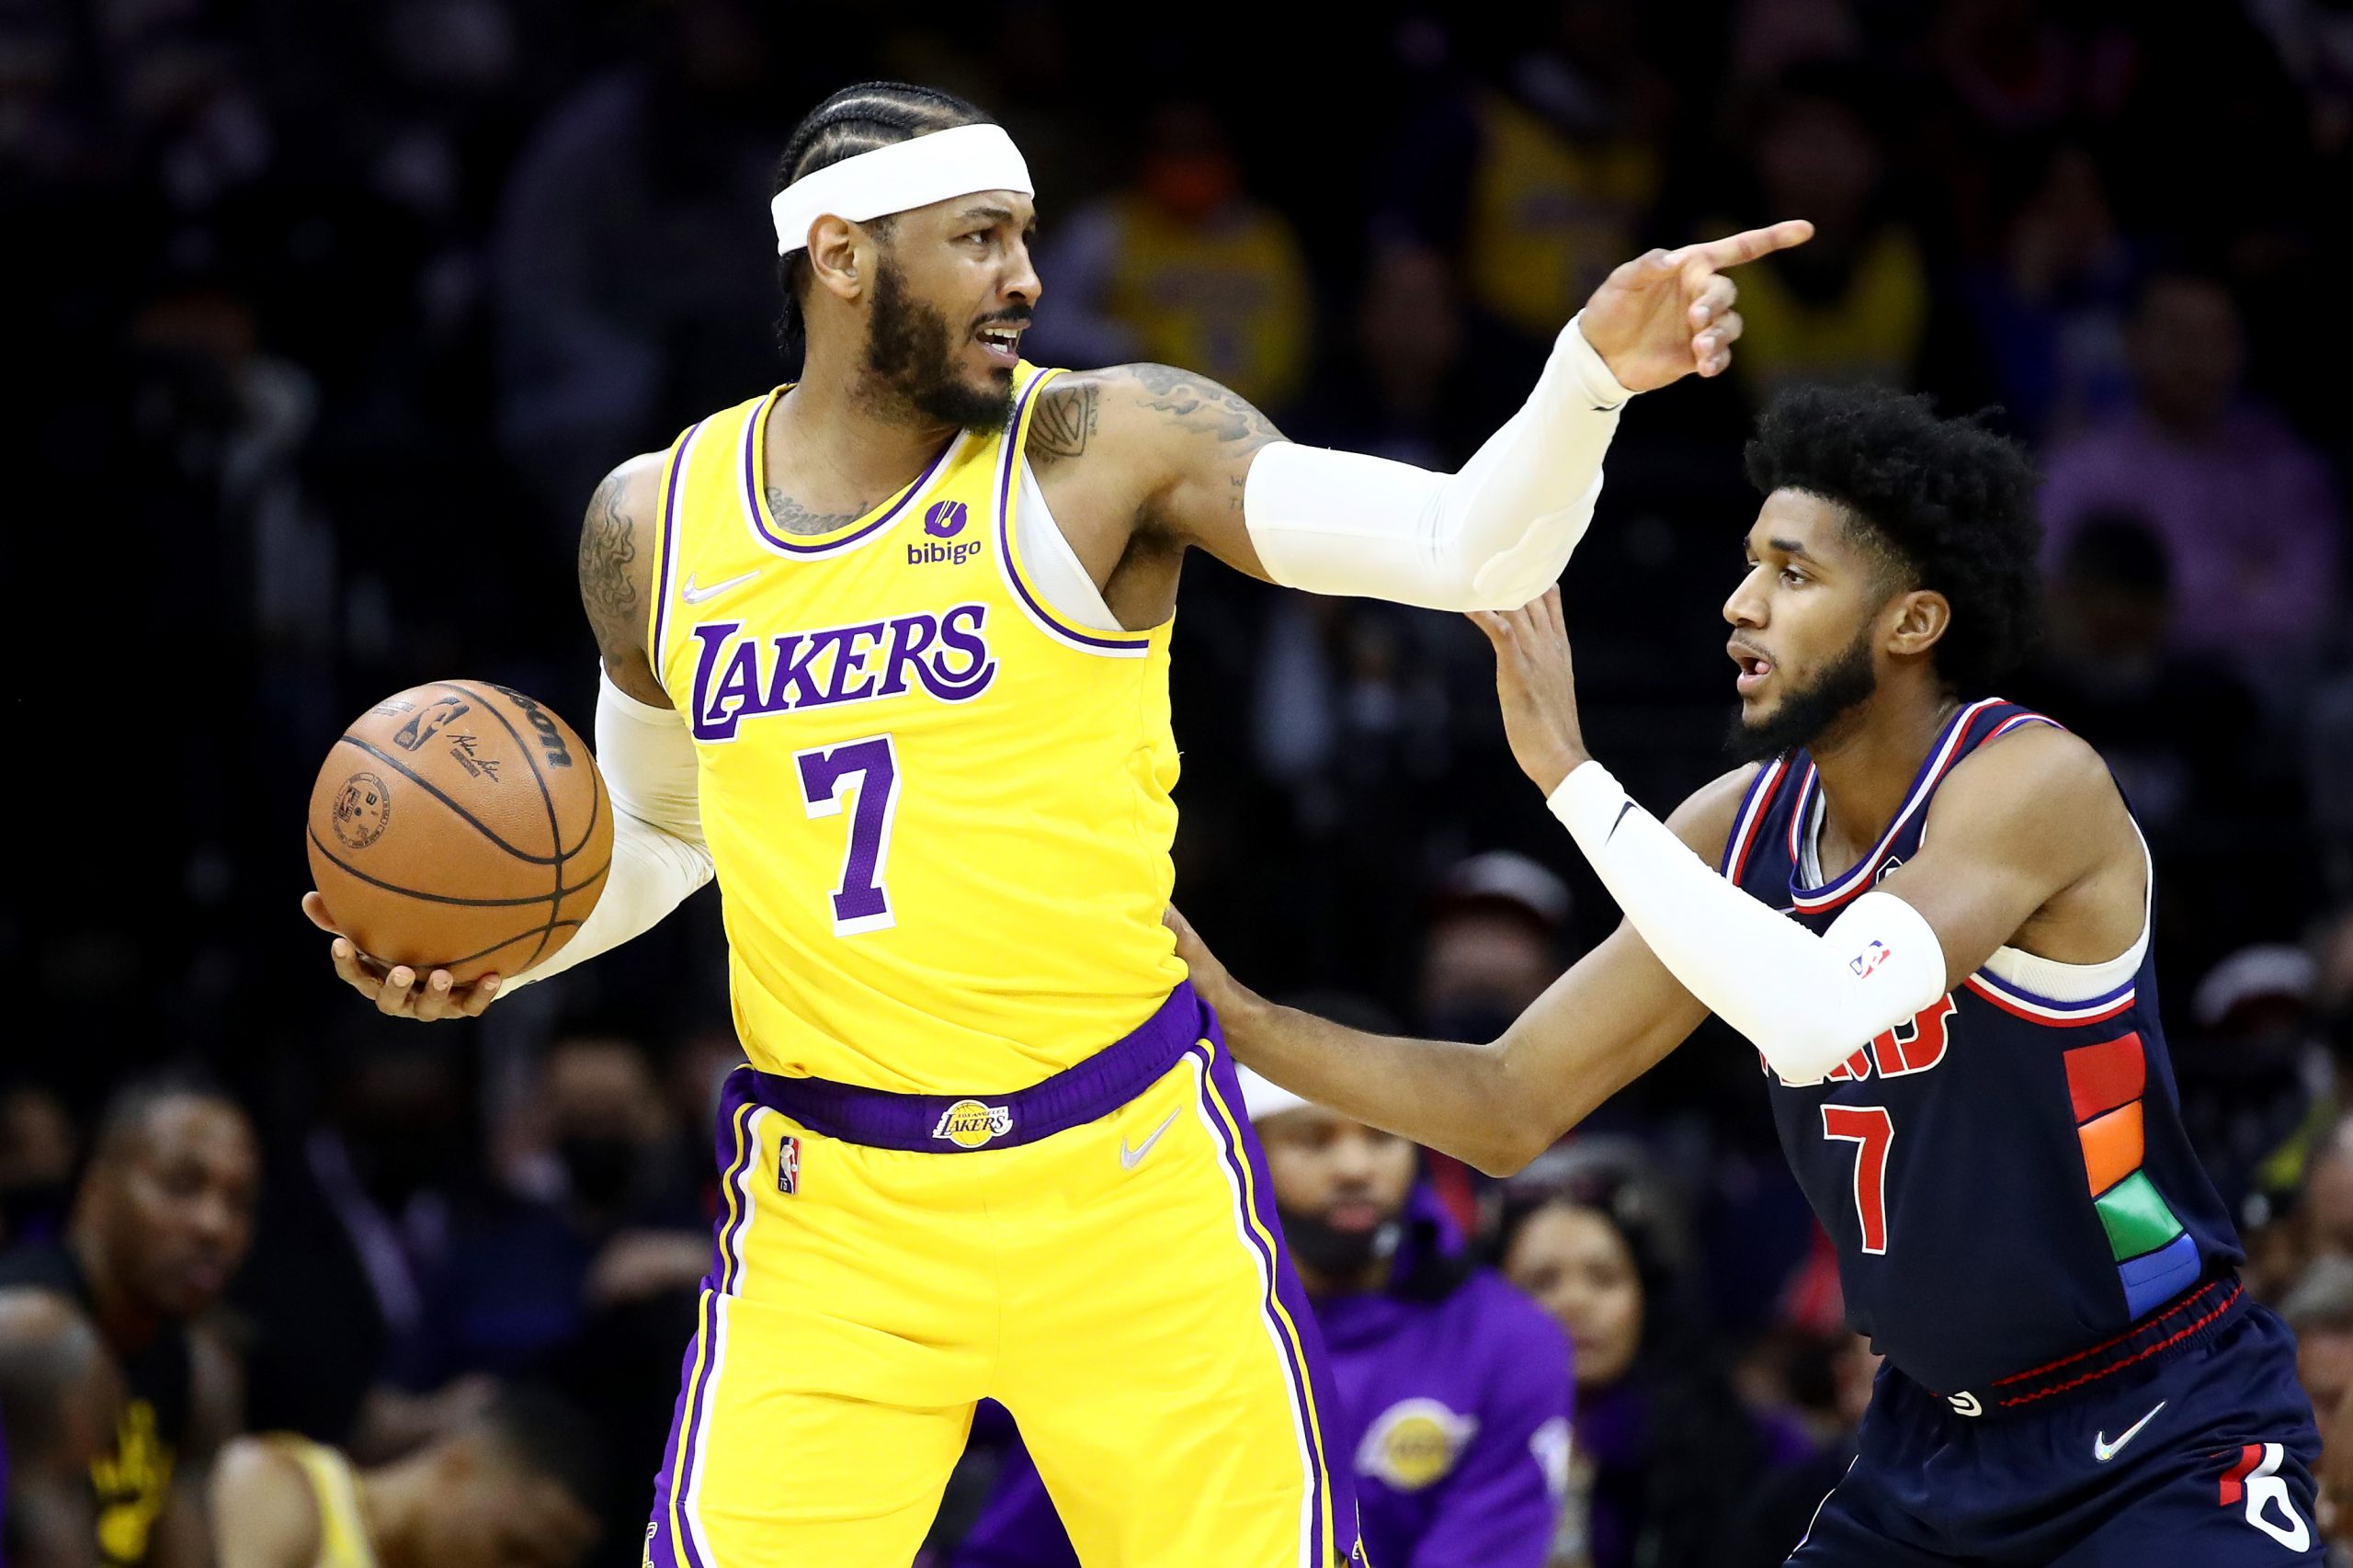 Los Angeles Lakers forward Carmelo Anthony directs traffic while being guarded by Philadelphia 76ers forward Isaiah Joe during a game at Wells Fargo Center on January 27, 2022.